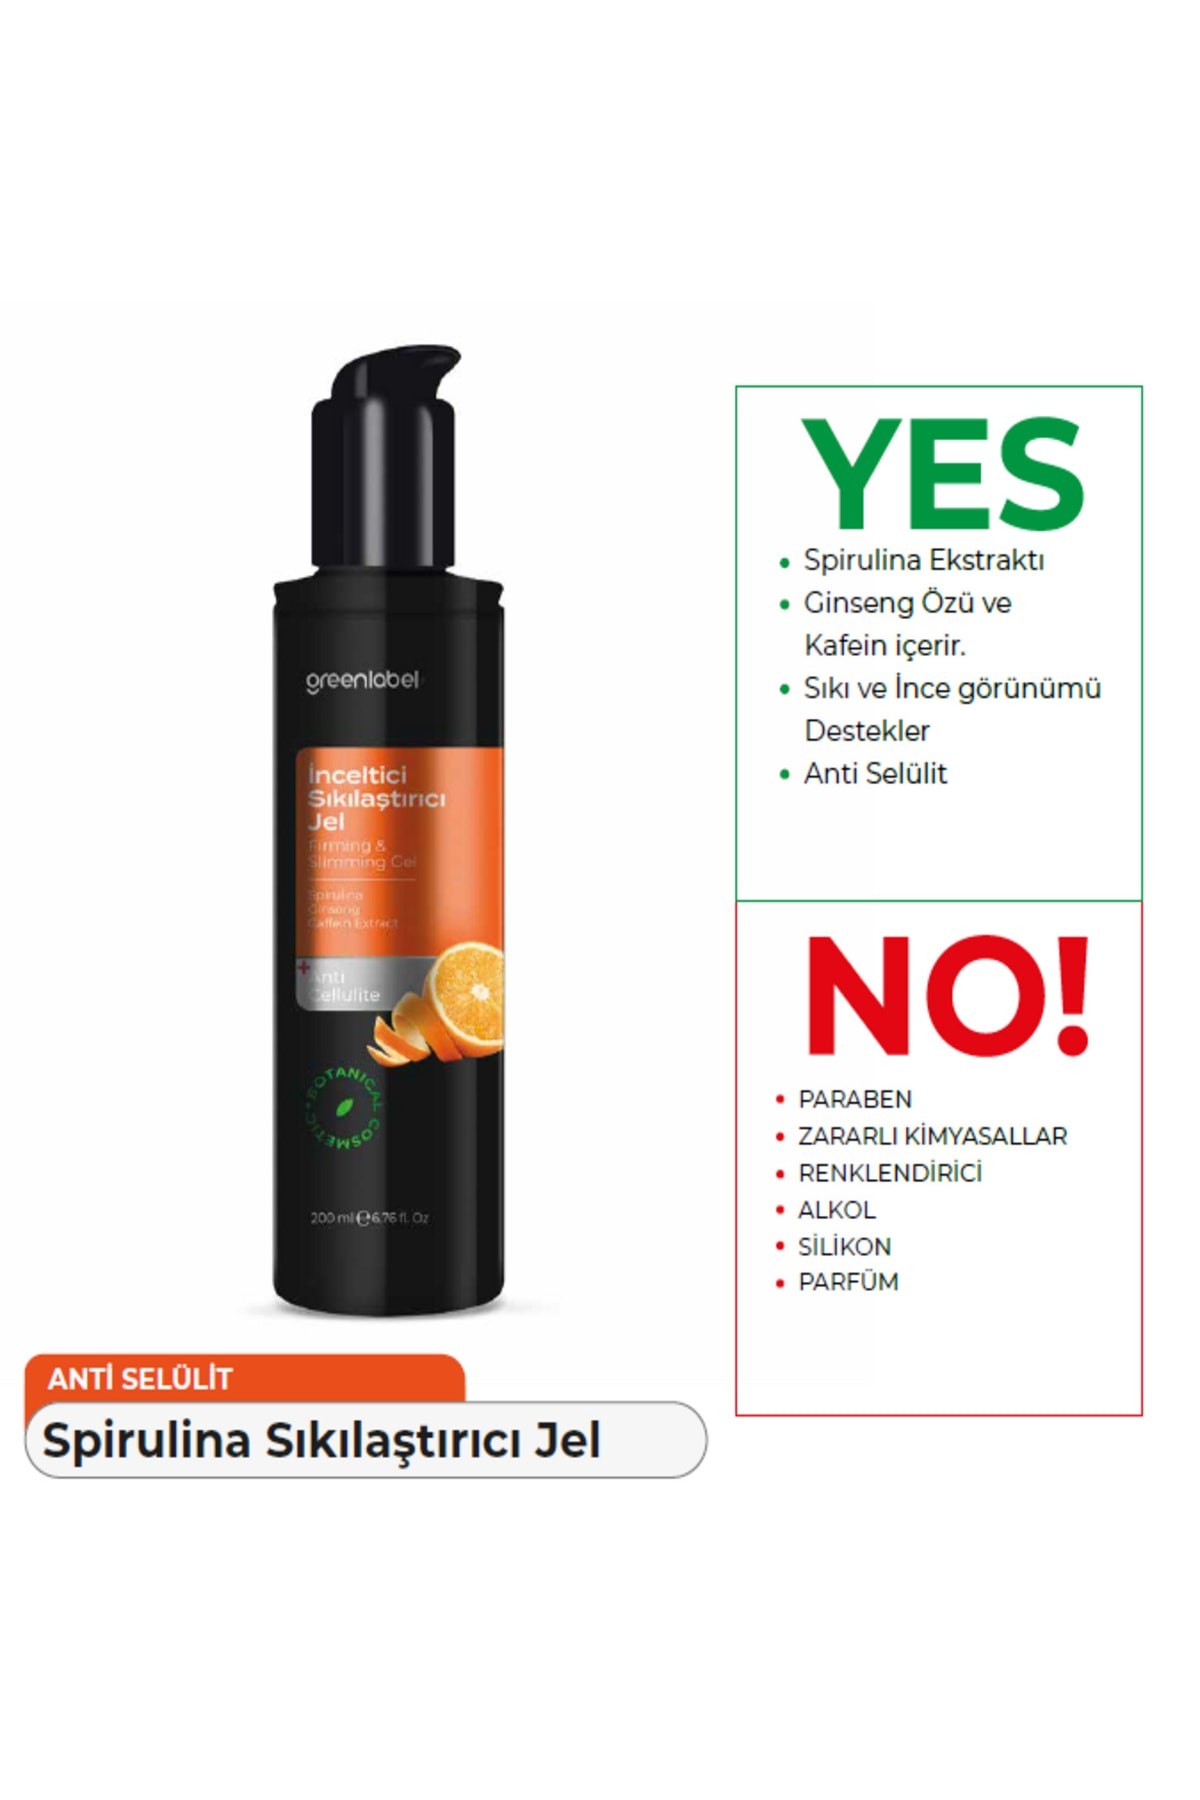 Spirulina and Caffeine Extract Firming and Slimming Body Gel 200ML